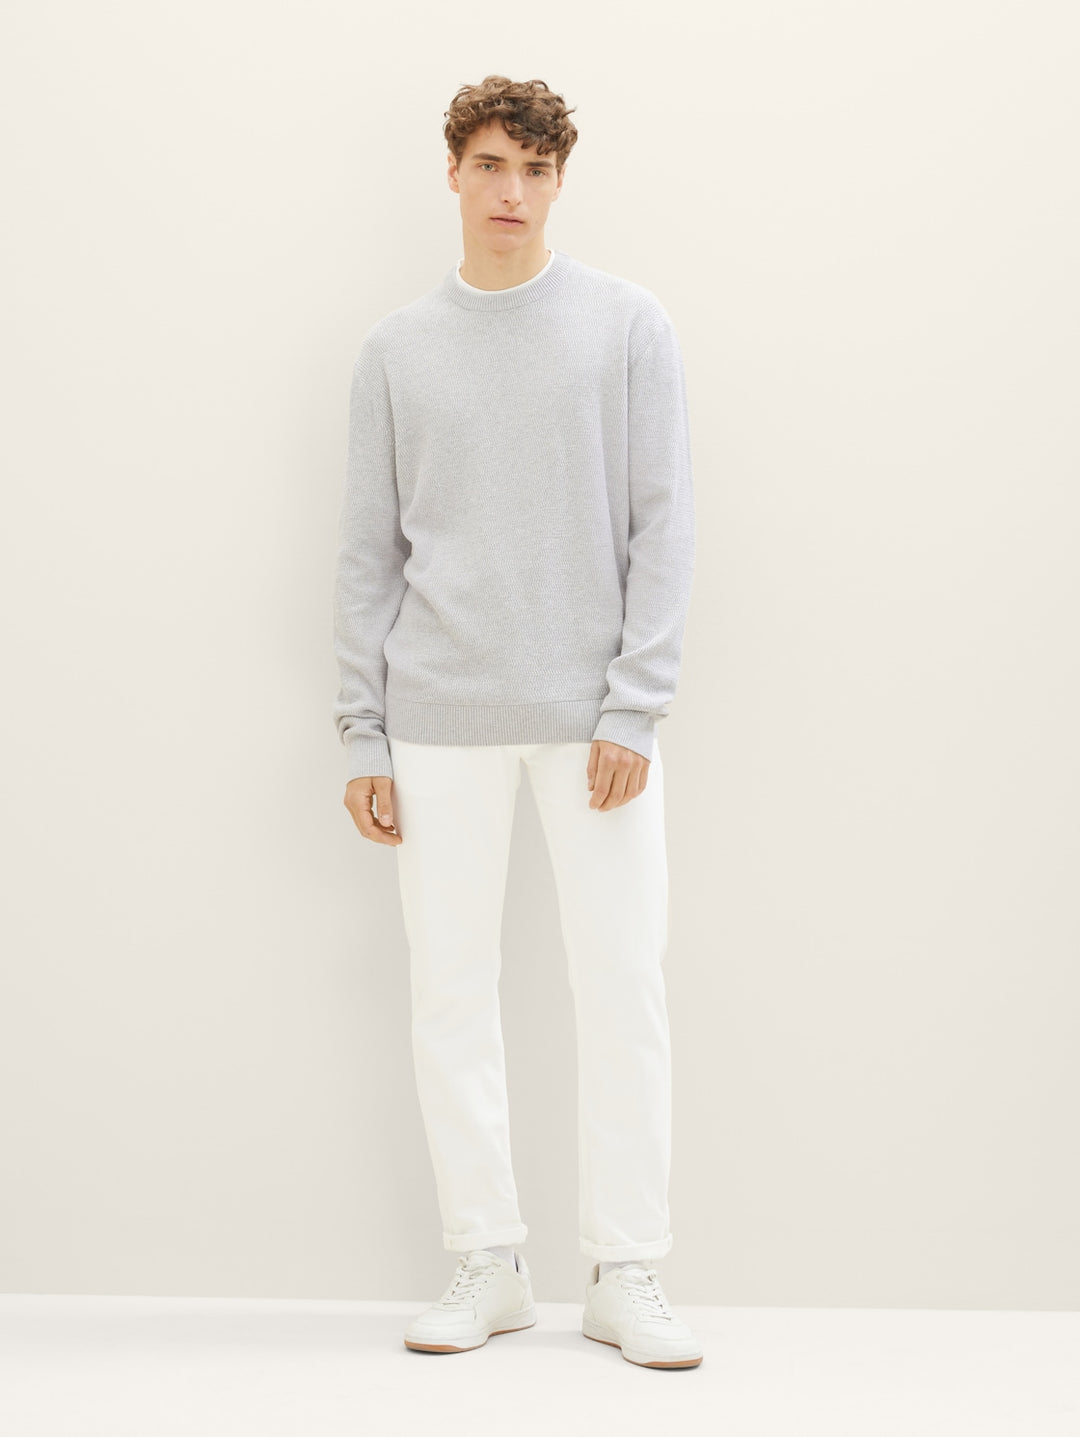 STRUCTURED DOUBLELAYER KNIT